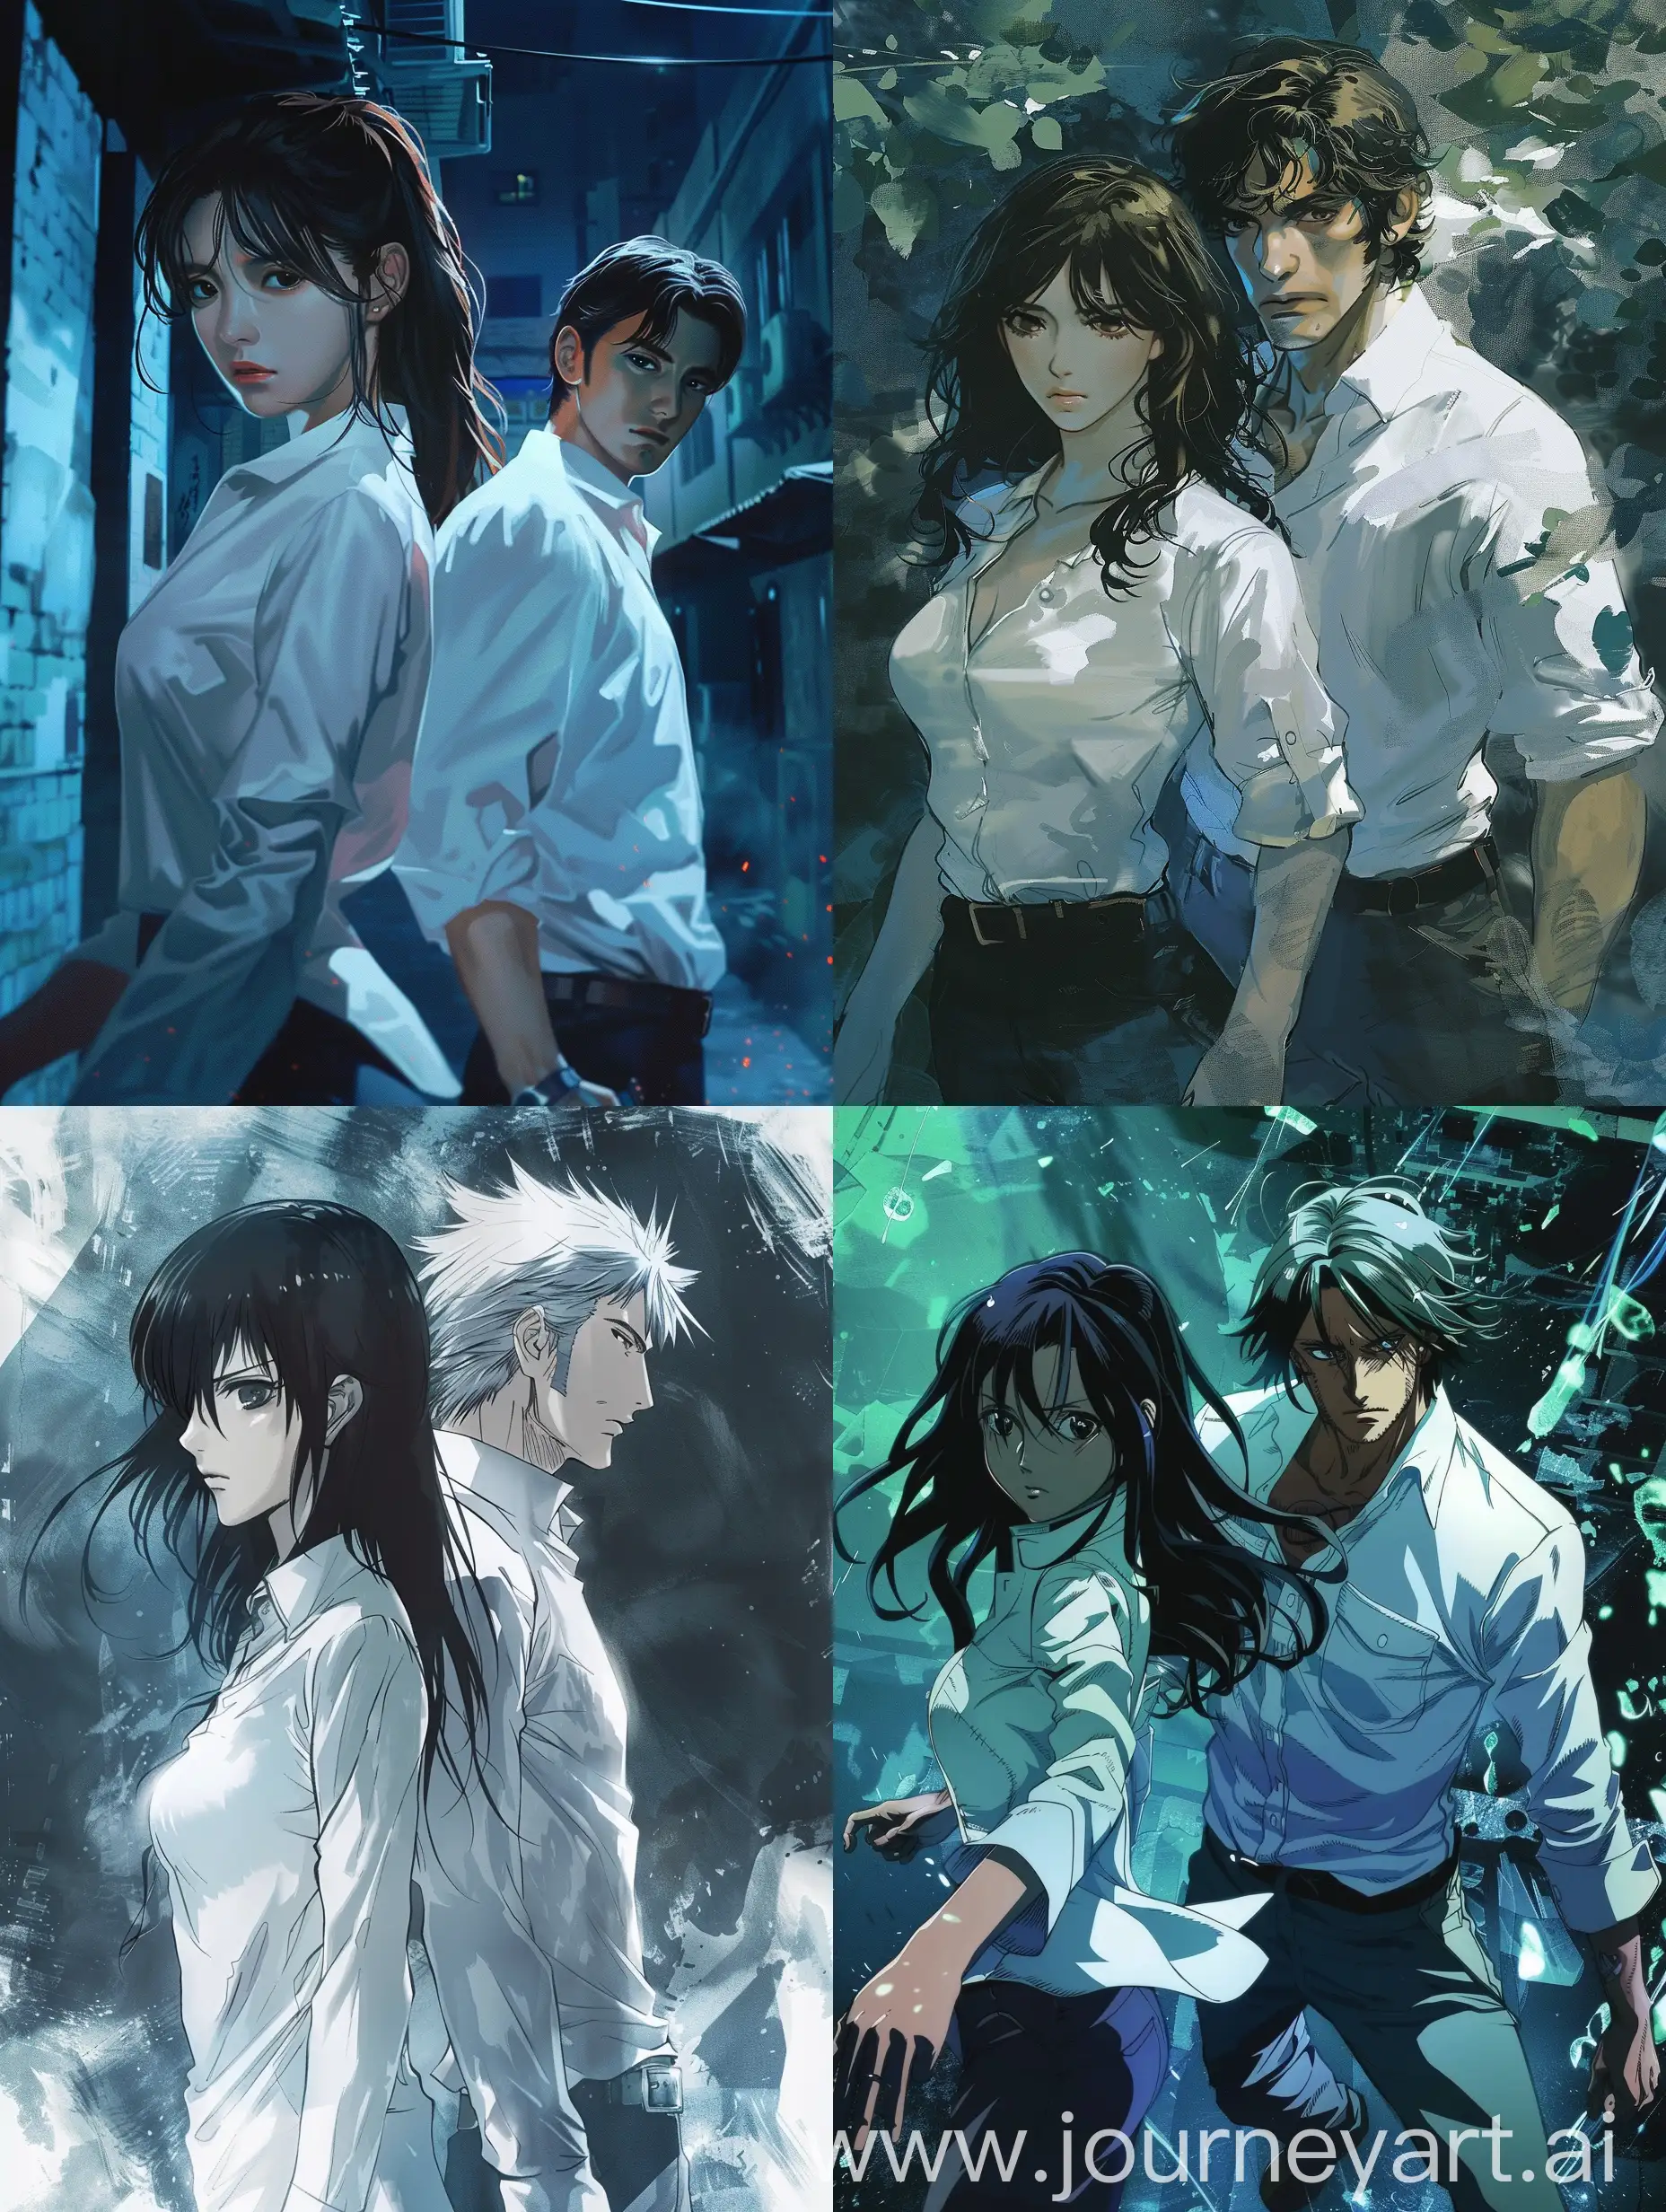 Mysterious-Duo-DarkHaired-Girl-and-WhiteShirted-Man-as-Detectives-in-a-Fantasy-Setting